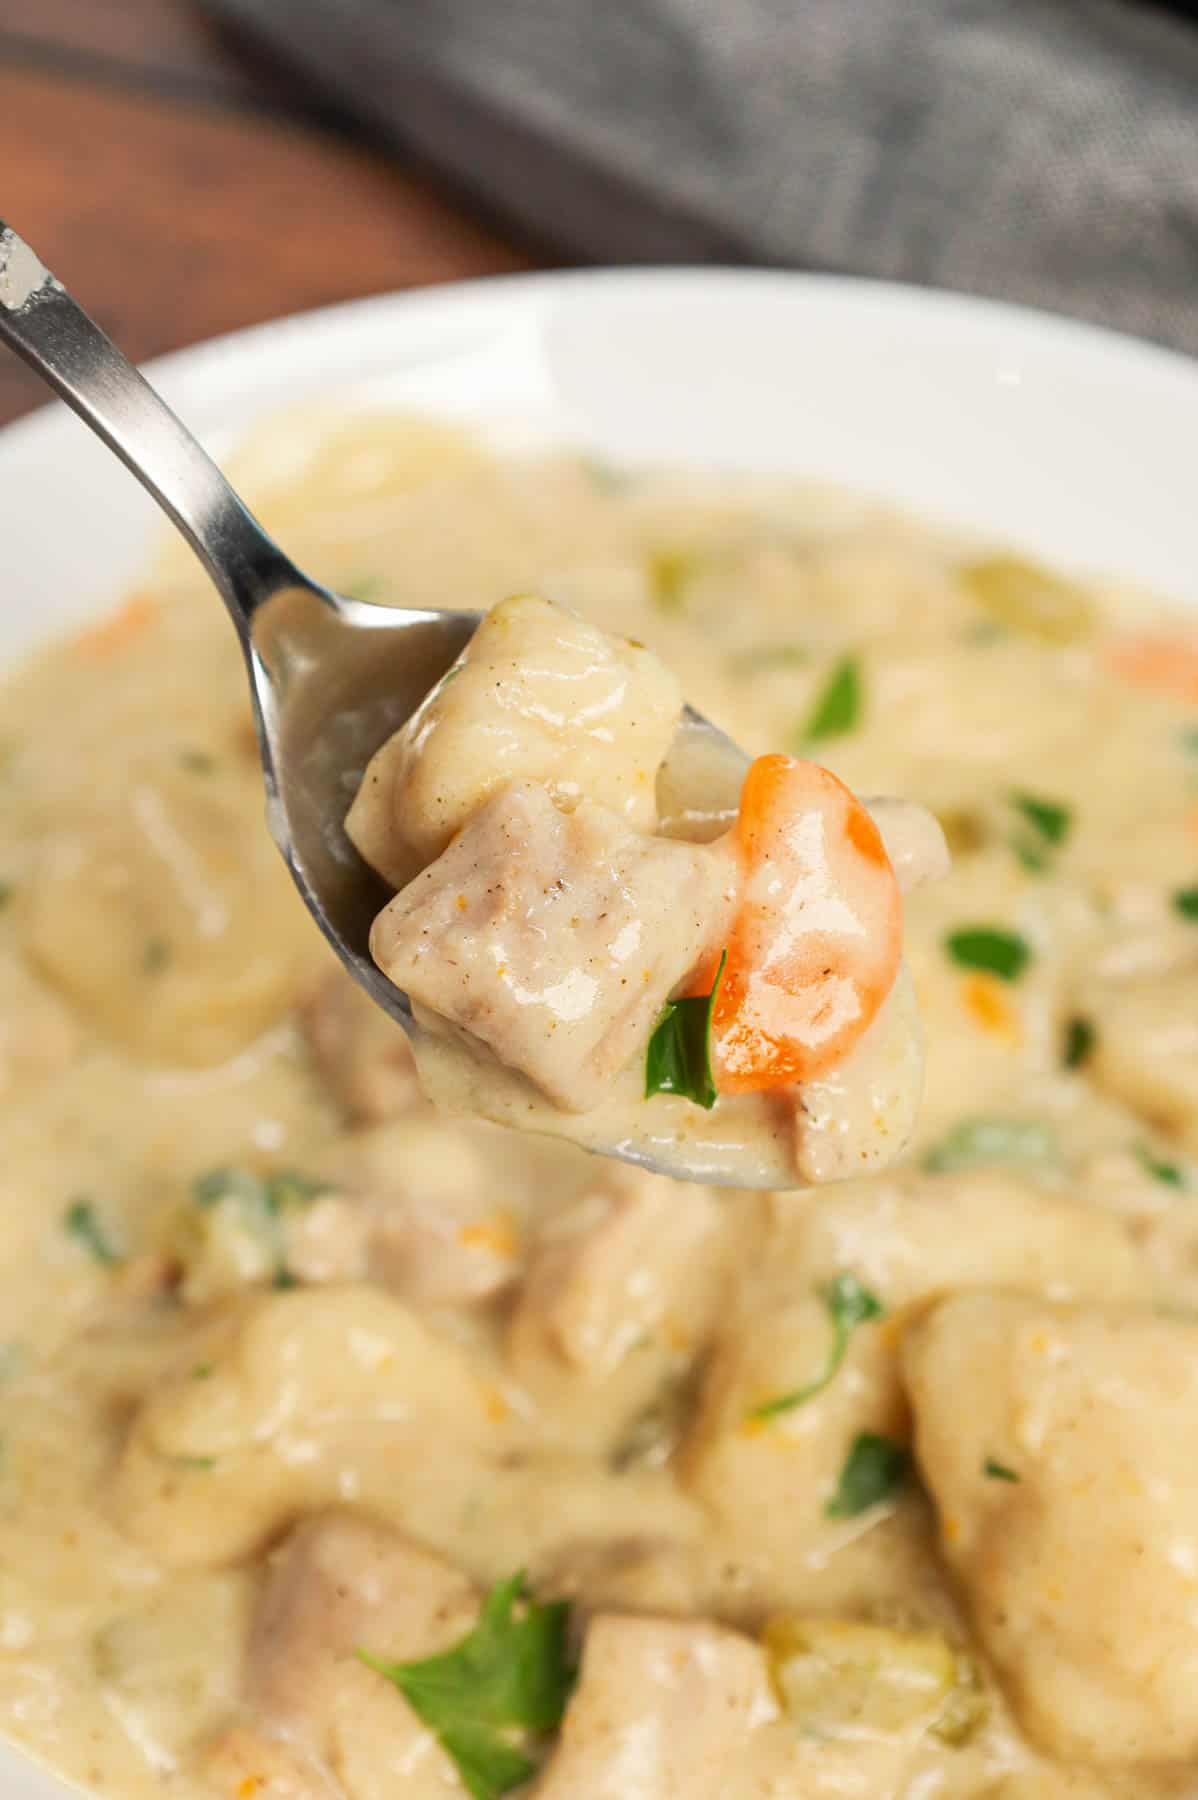 Dutch Oven Chicken and Dumplings is hearty dinner recipe loaded with chunks of chicken, onion, celery, carrots and soft doughy Bisquick dumplings all in a creamy and flavourful broth.